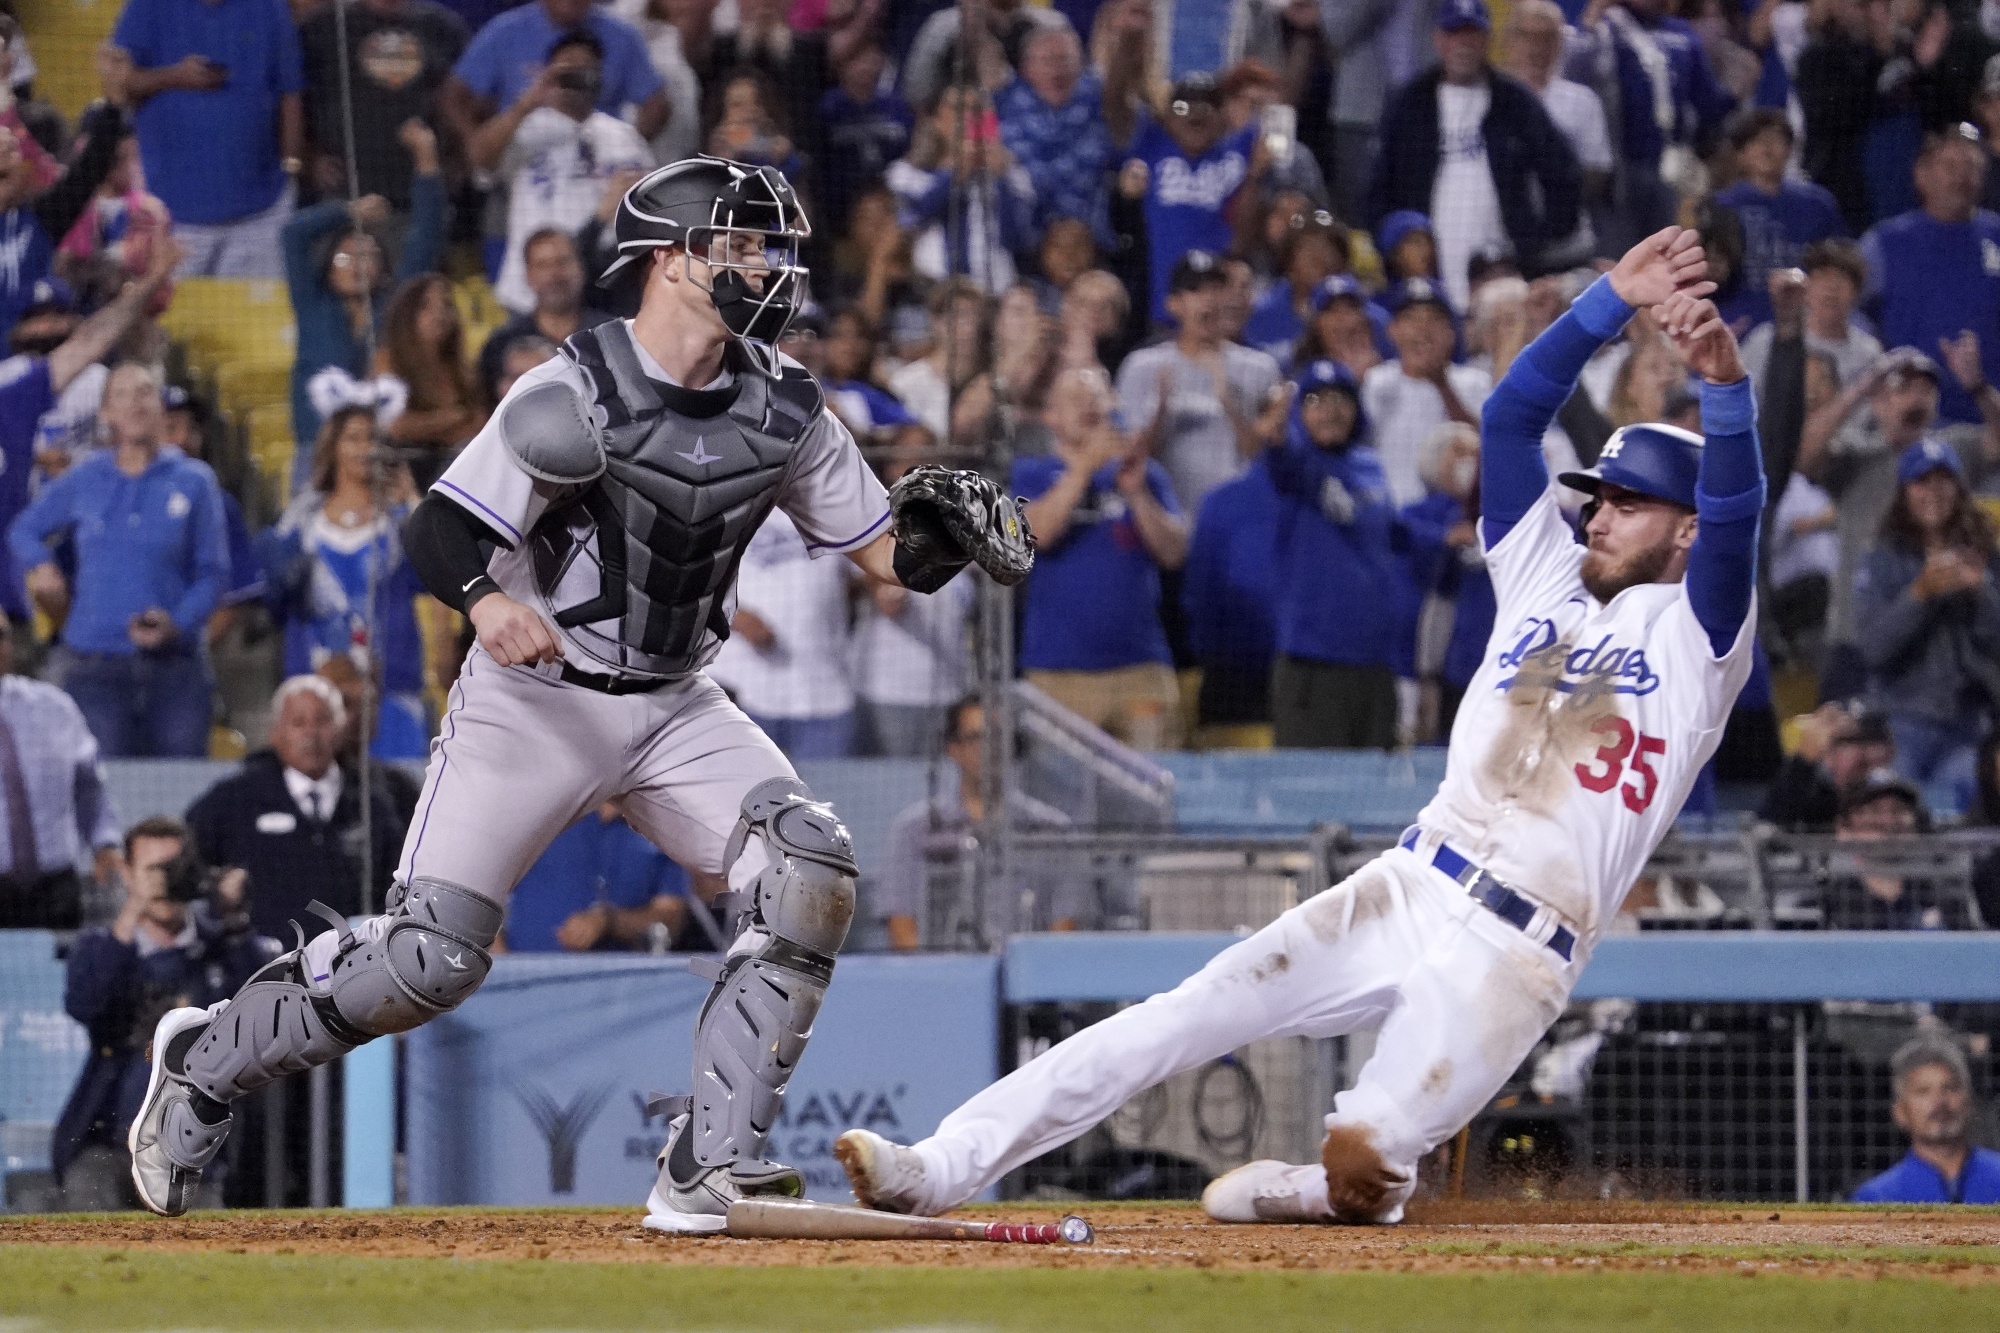 Cody Bellinger drives in the game-winning run in the top of the